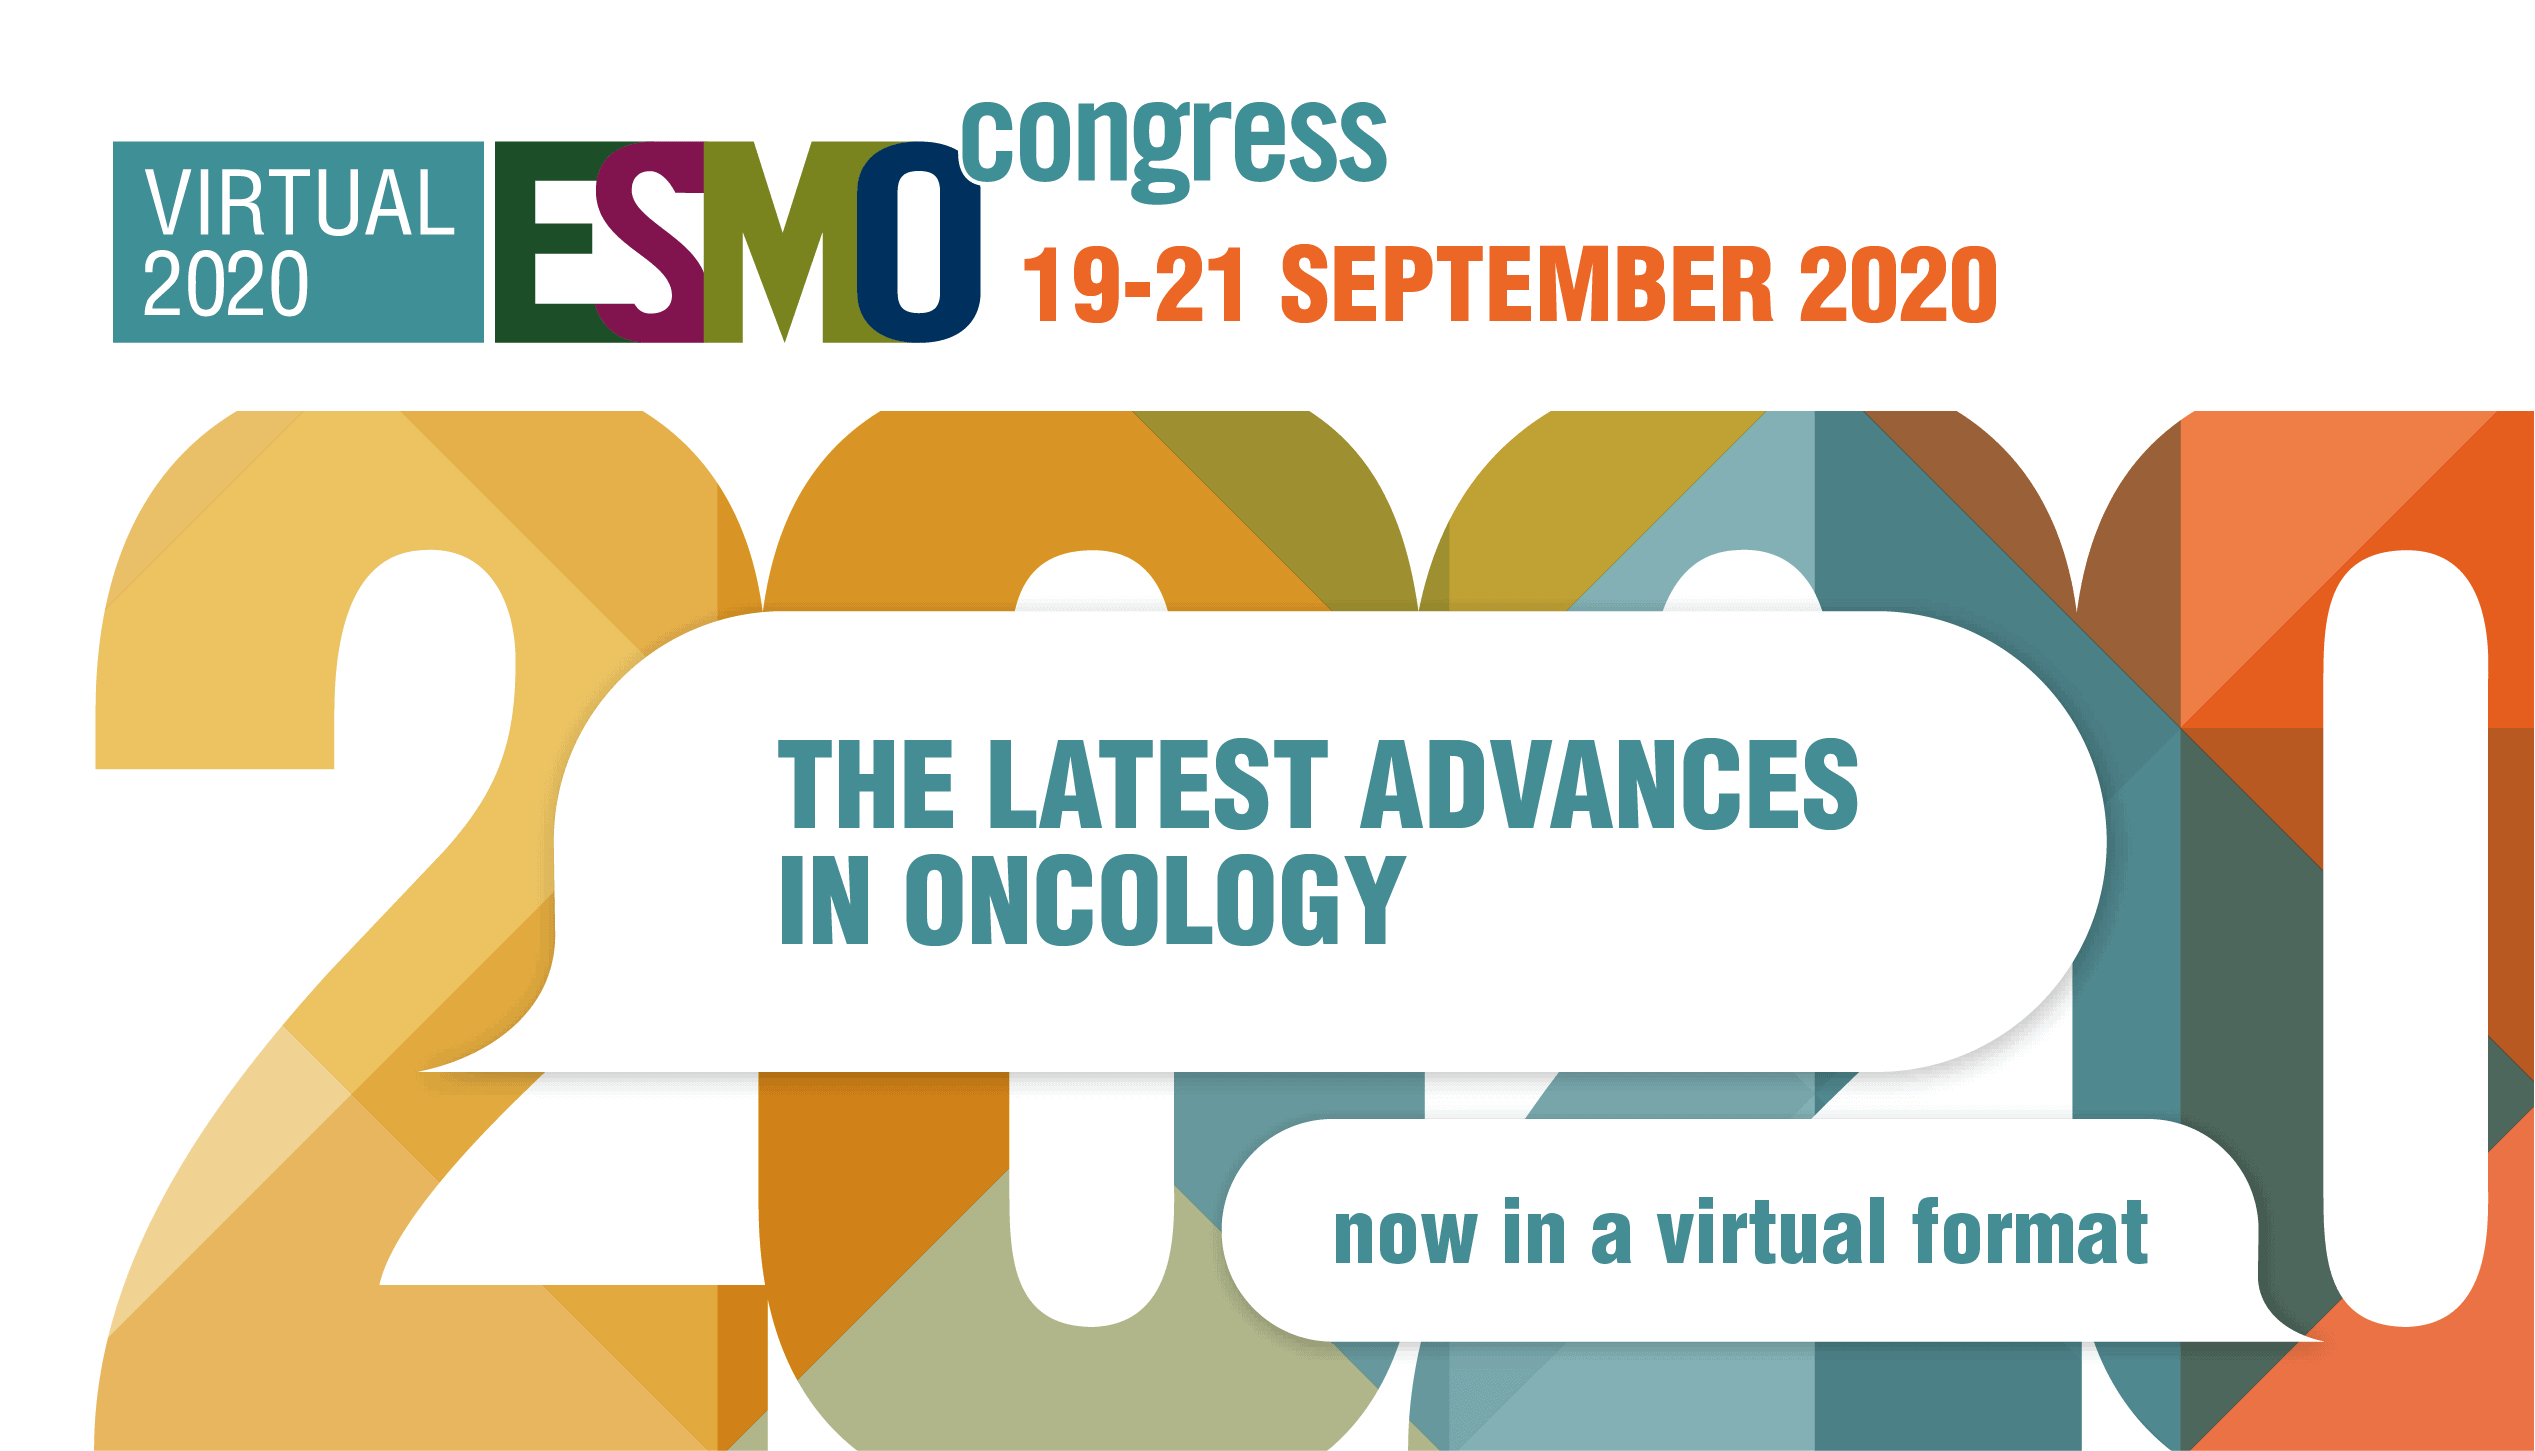 ESMO Virtual Congress 2020 Around the Corner: All Eyes On Lung Cancer